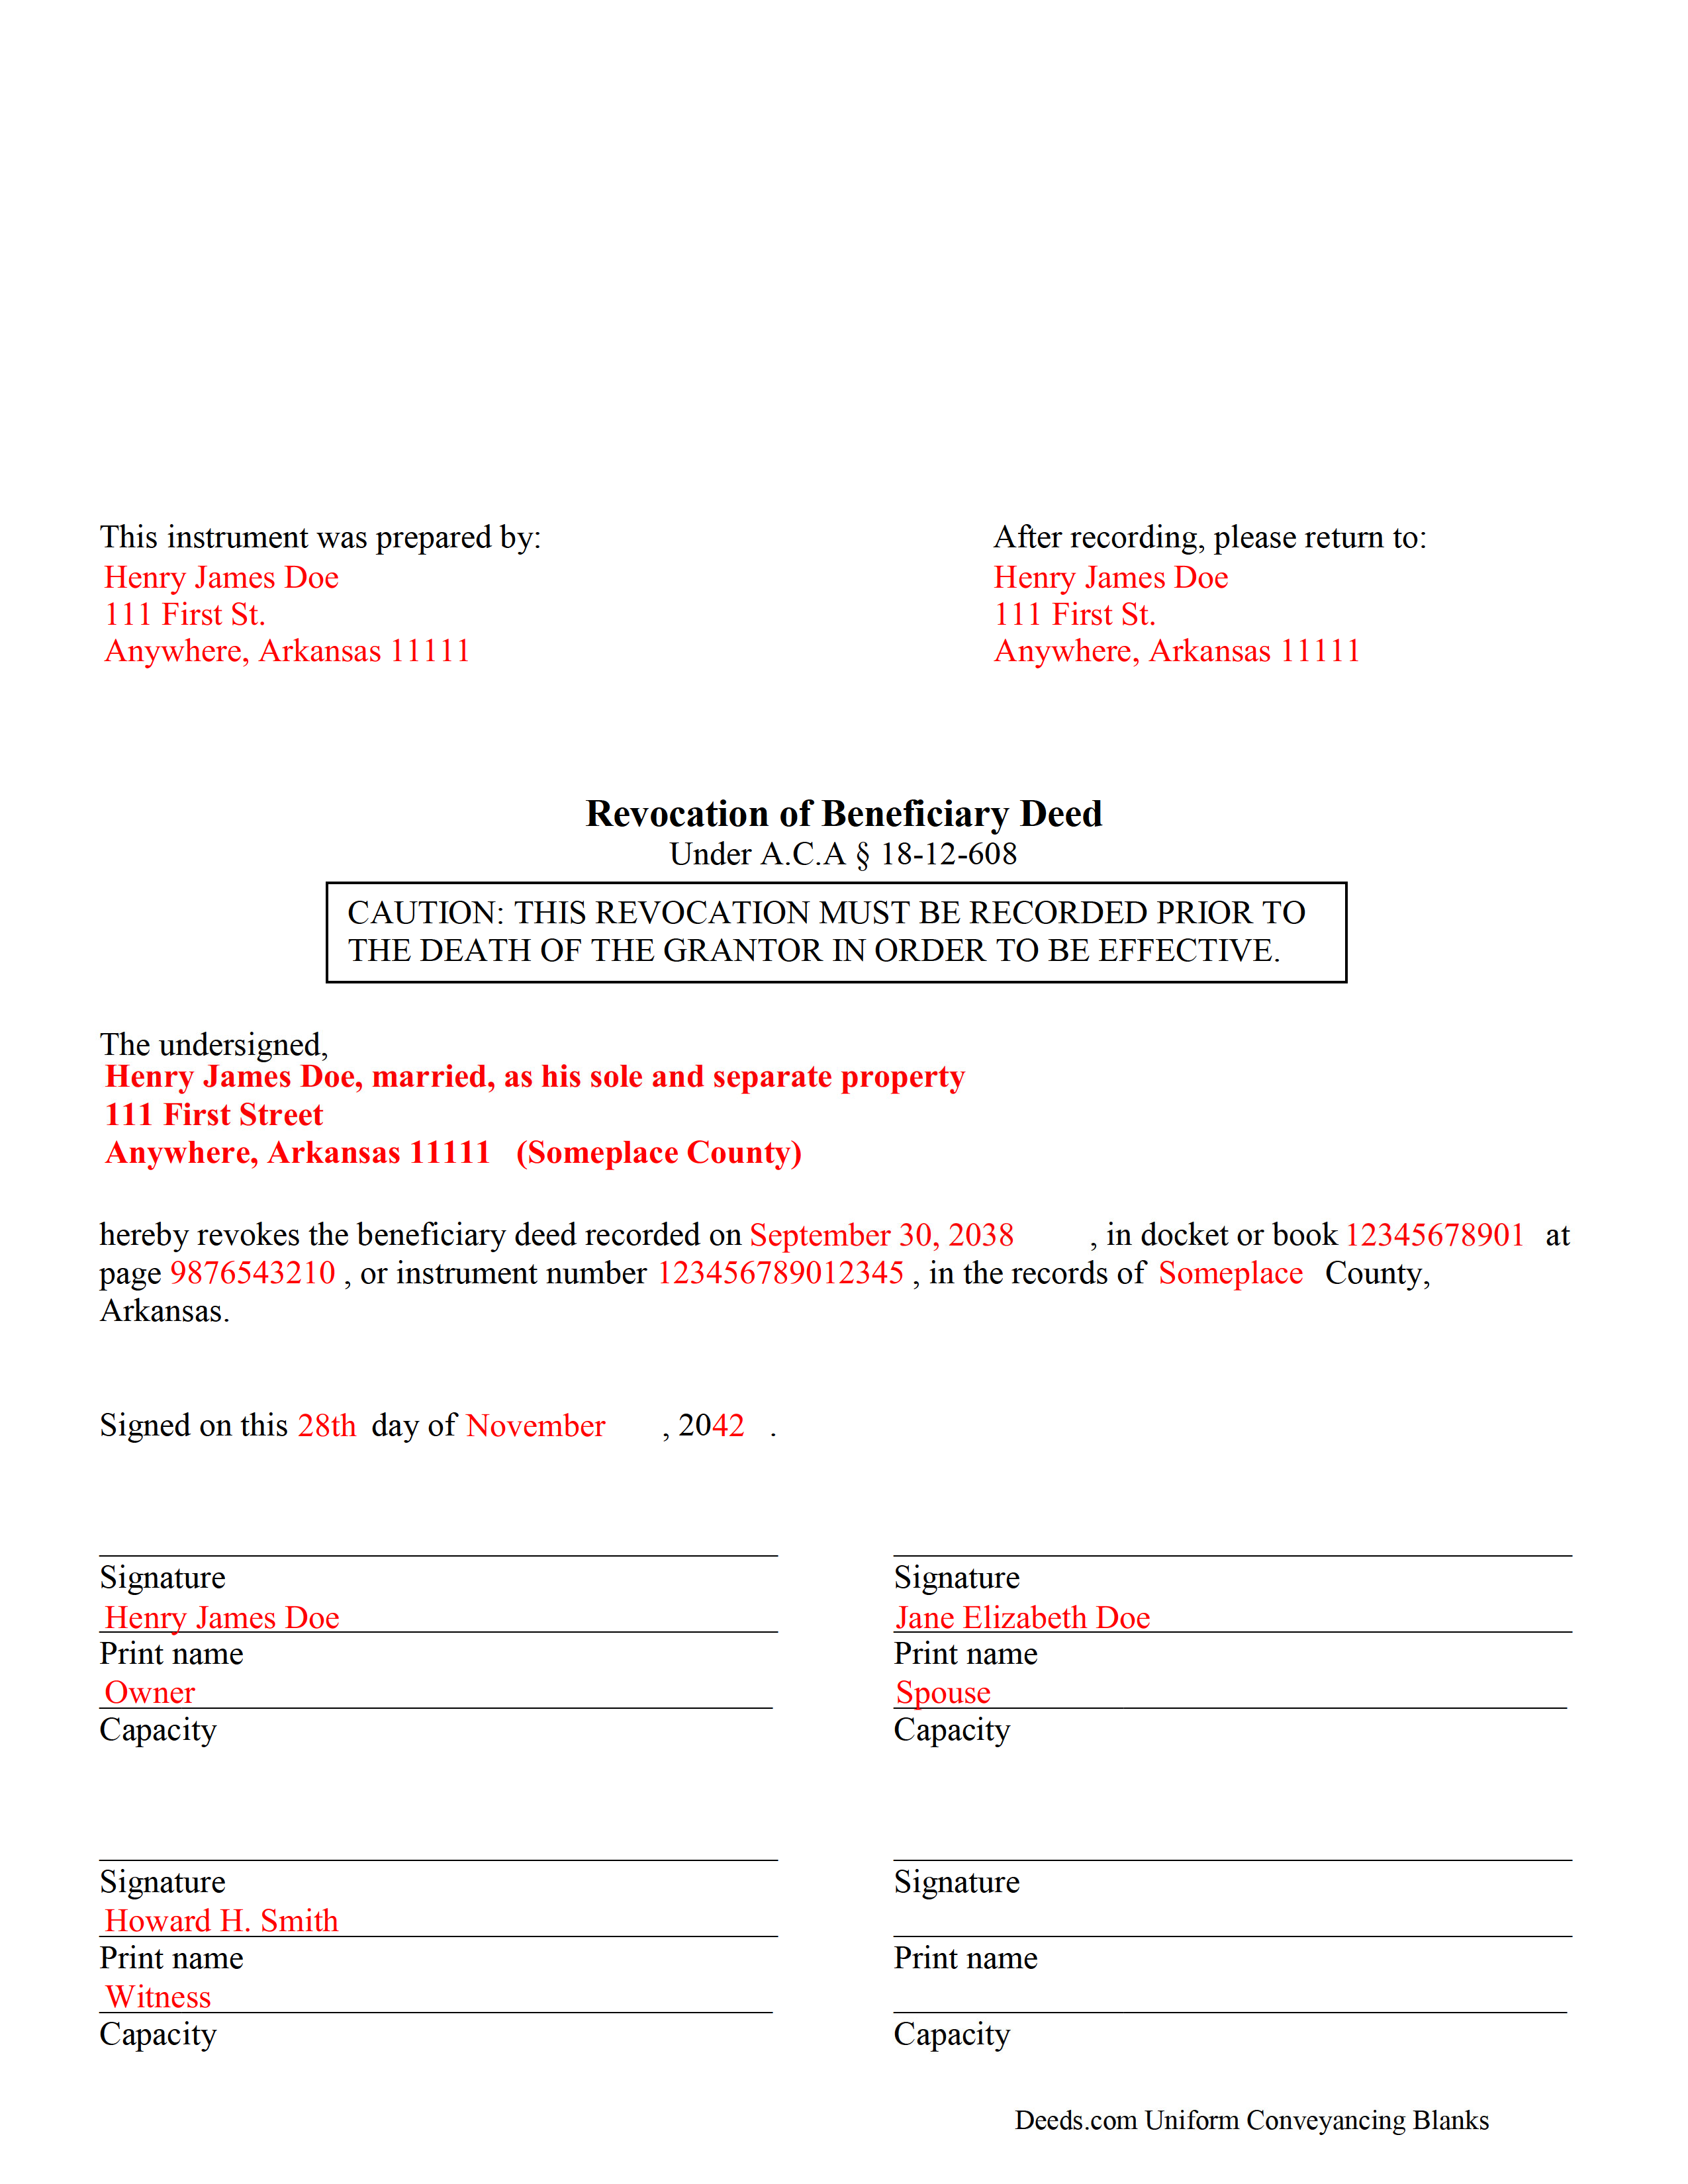 Completed Example of the Beneficiary Deed Revocation Document